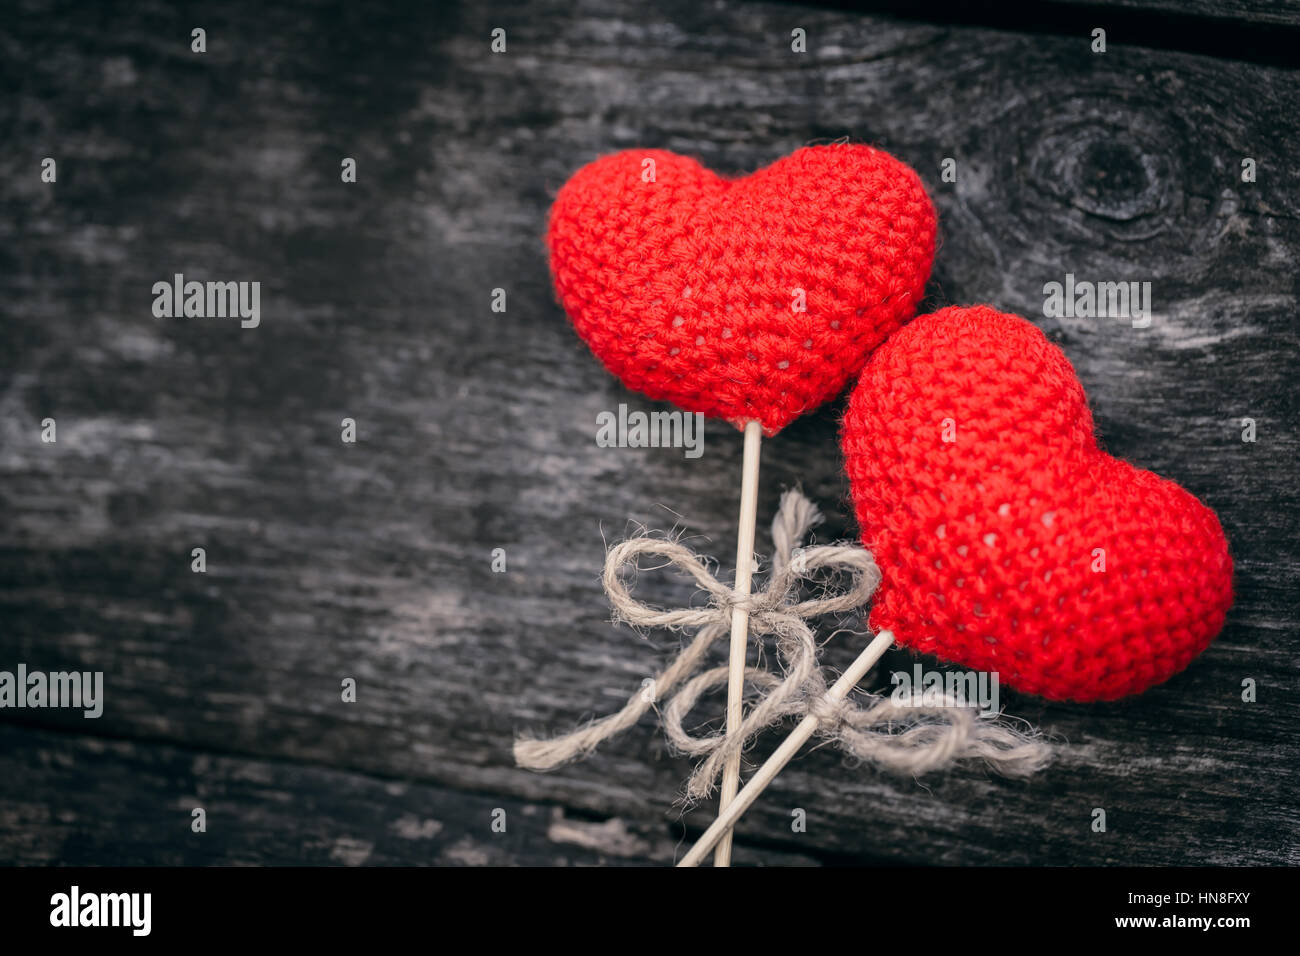 Sweet two red heart lover for Valentine's day love art background. Stock Photo